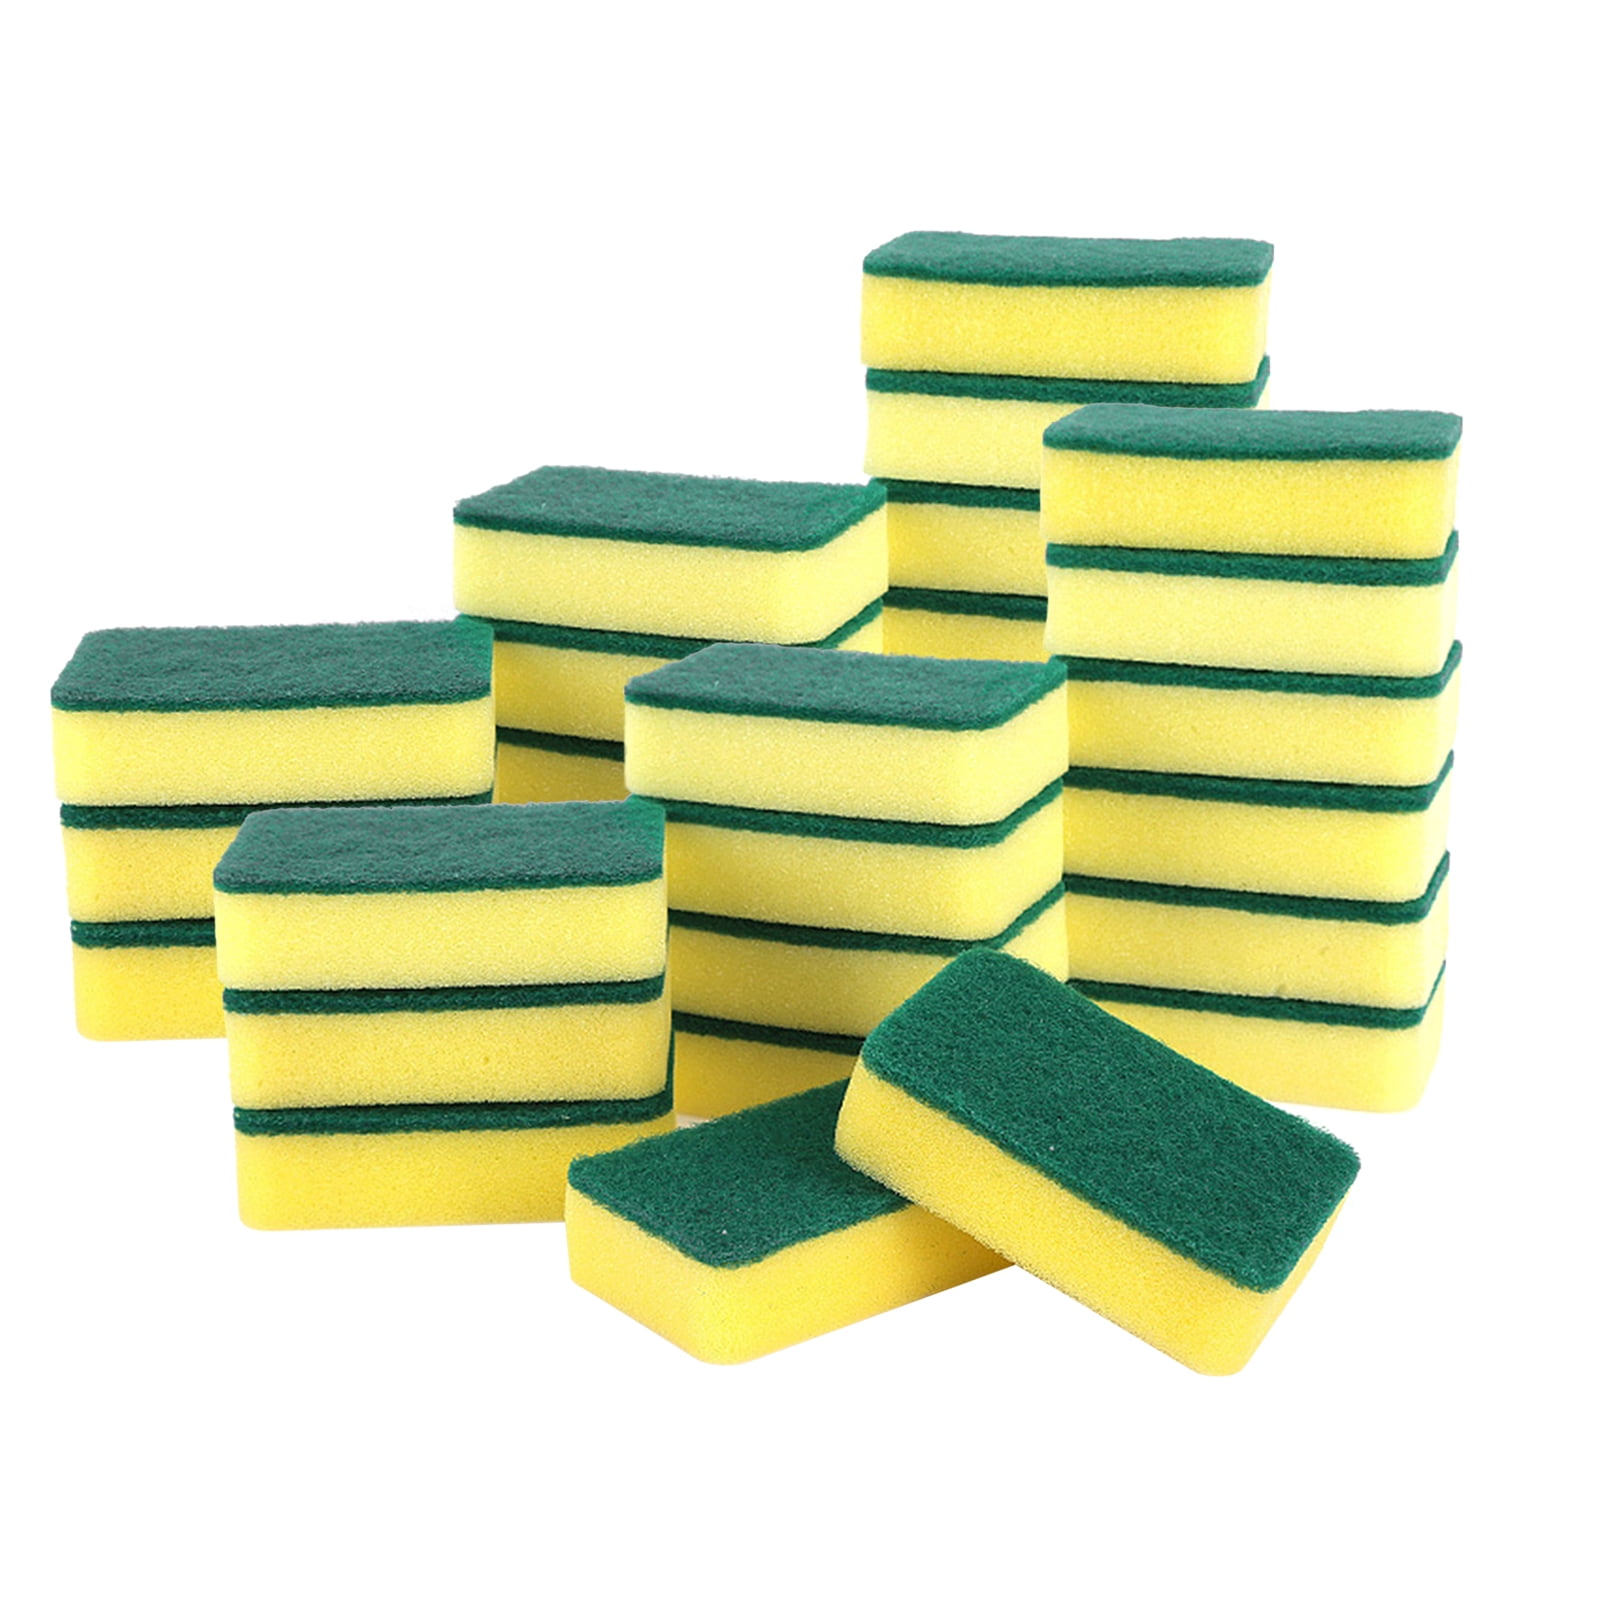 50 Green and Yellow Sponges Kitchen Scrubbers Cleaning Dishwashing Scouring  Pads - 1 Super Party